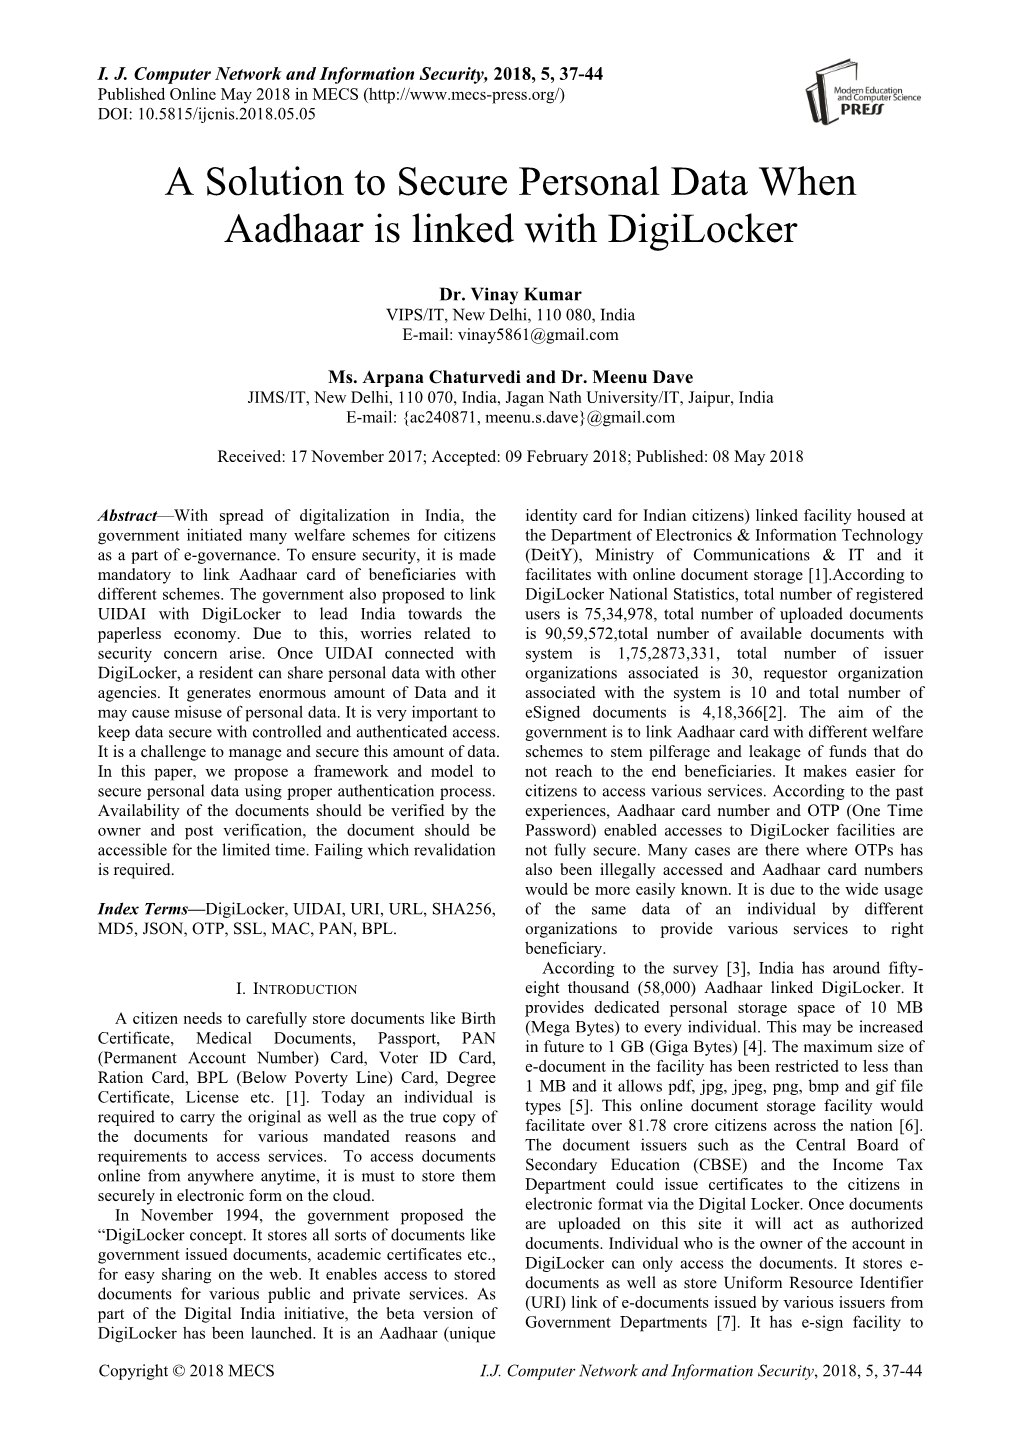 A Solution to Secure Personal Data When Aadhaar Is Linked with Digilocker